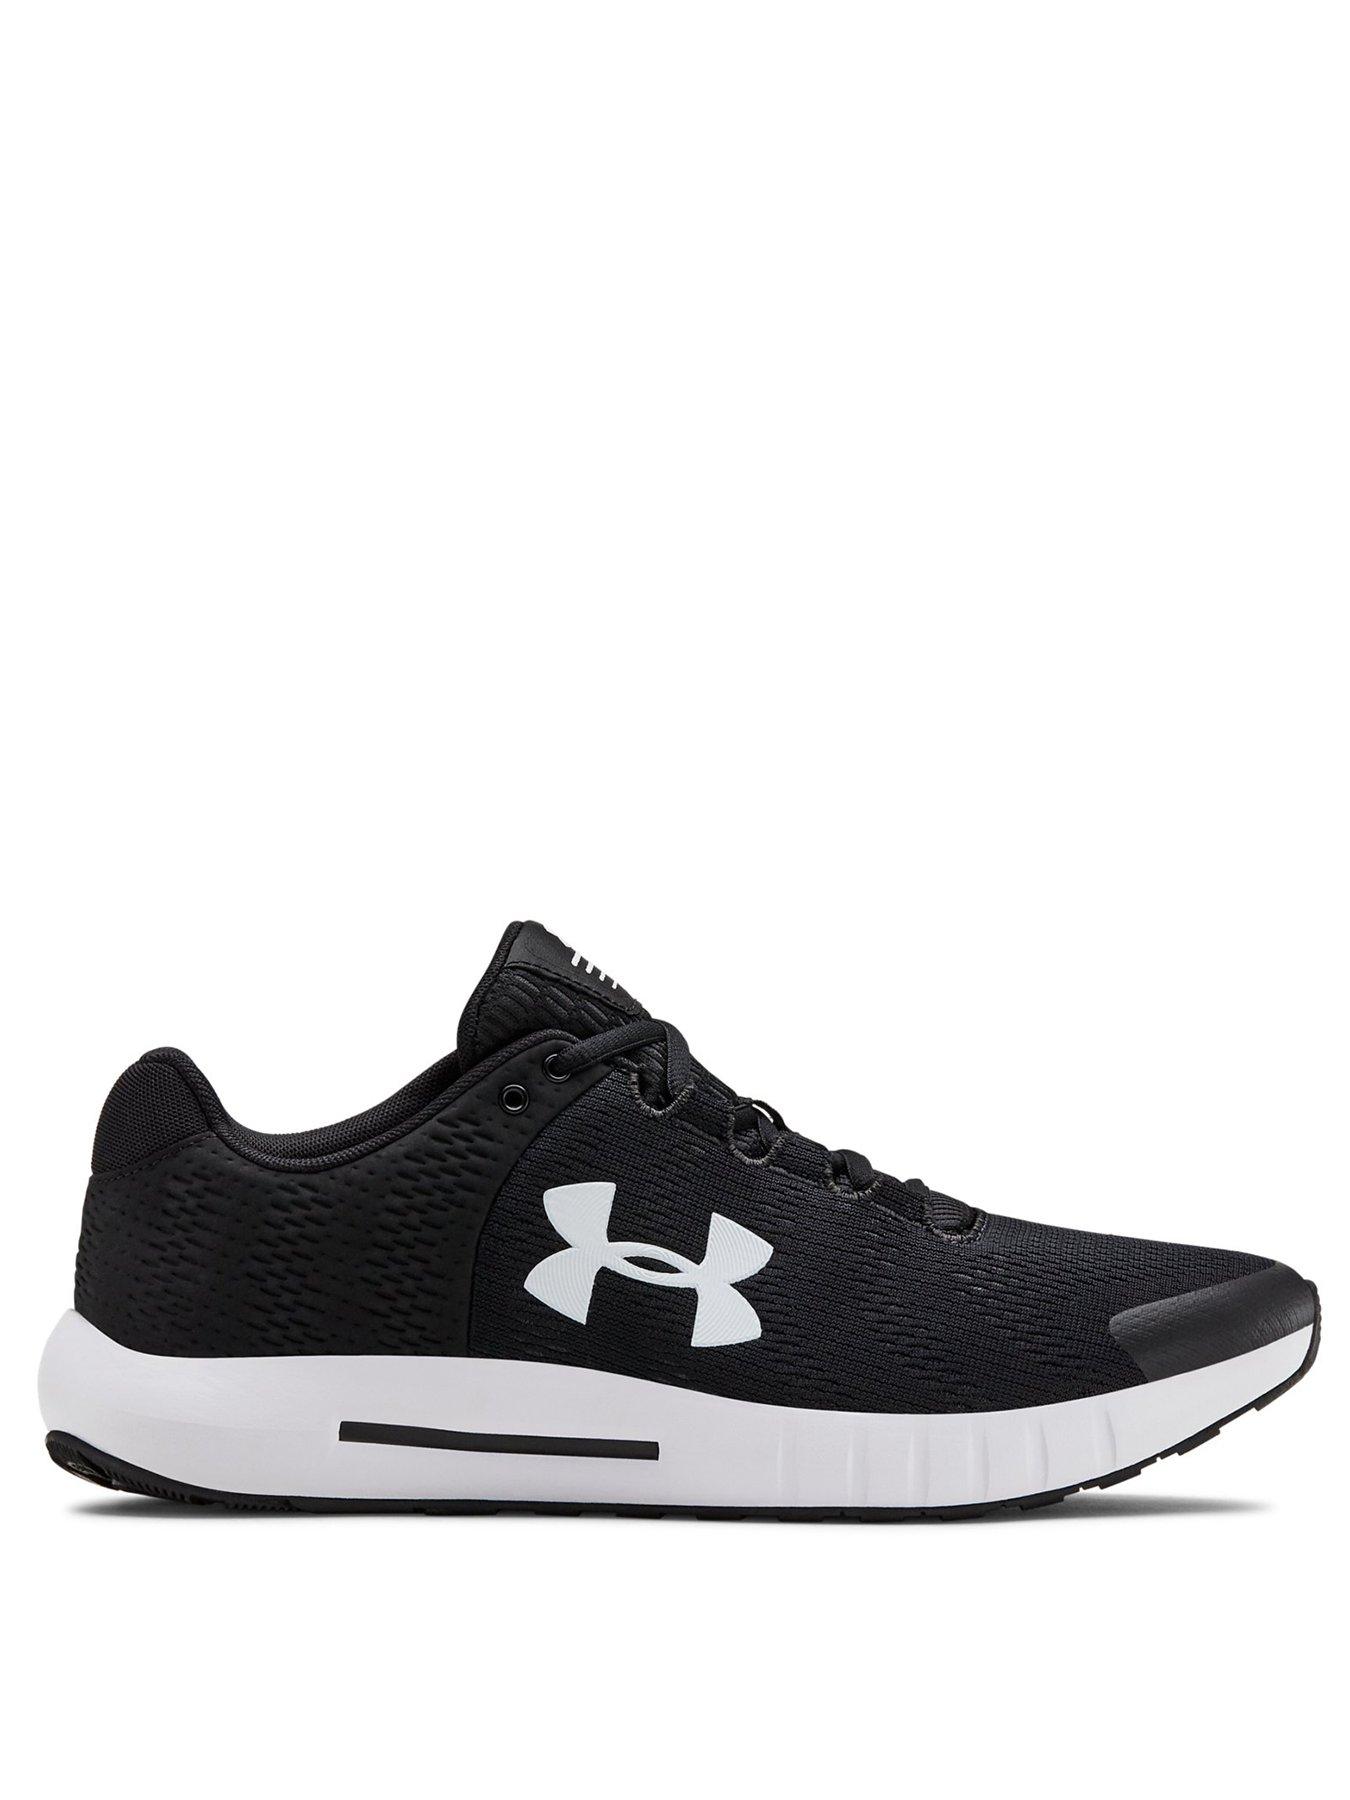 under armour micro g trainers